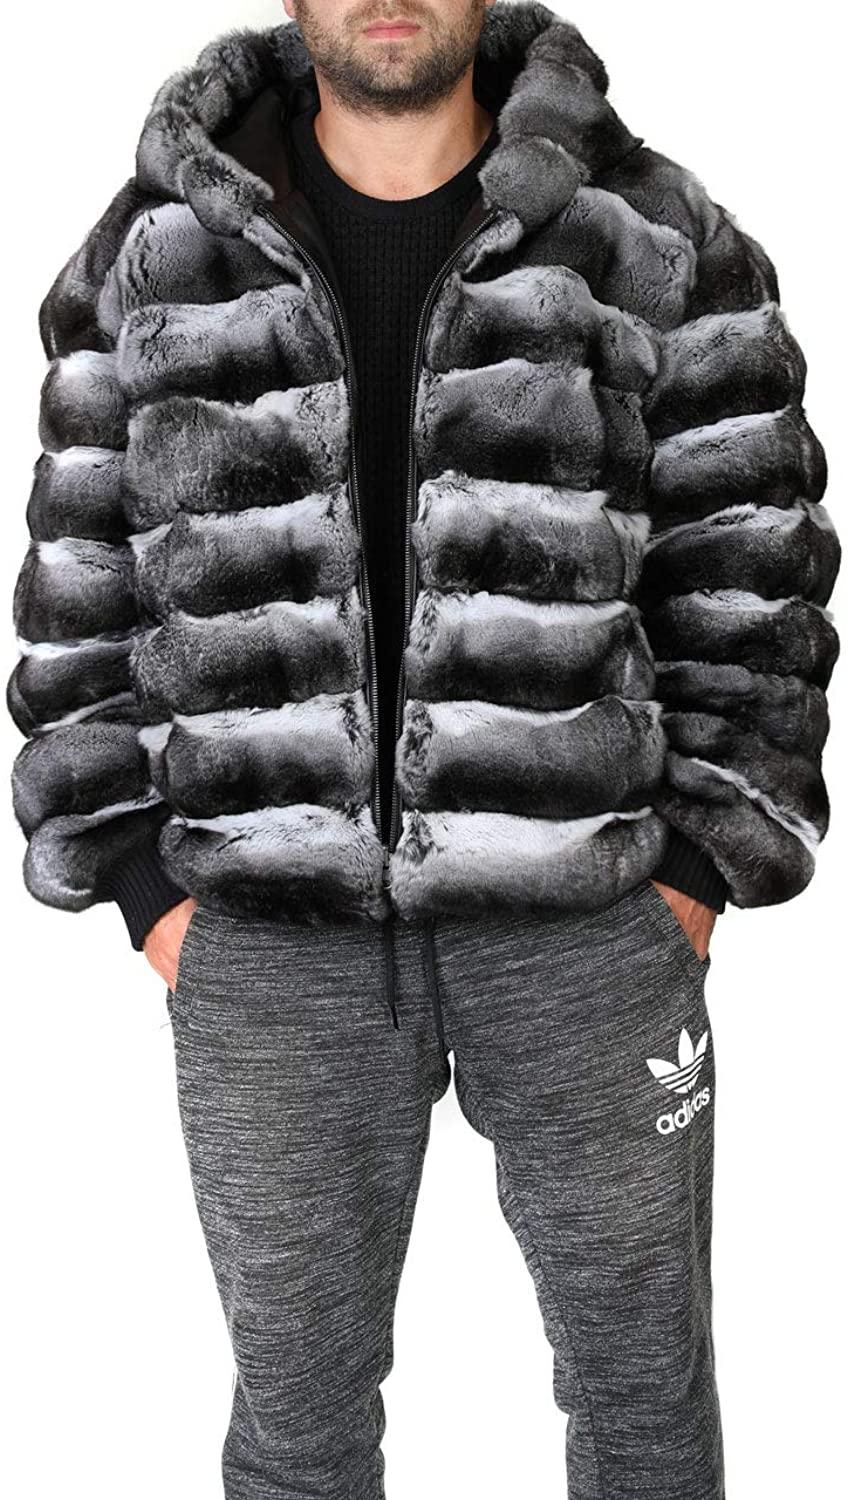 Reversible leather jacket with chinchilla fur lining 

European high grade chinchilla pelts

High quality leather shell

Measurements on demand custom made 

comes in all sizes

Small, Medium, Large, Extra-Large